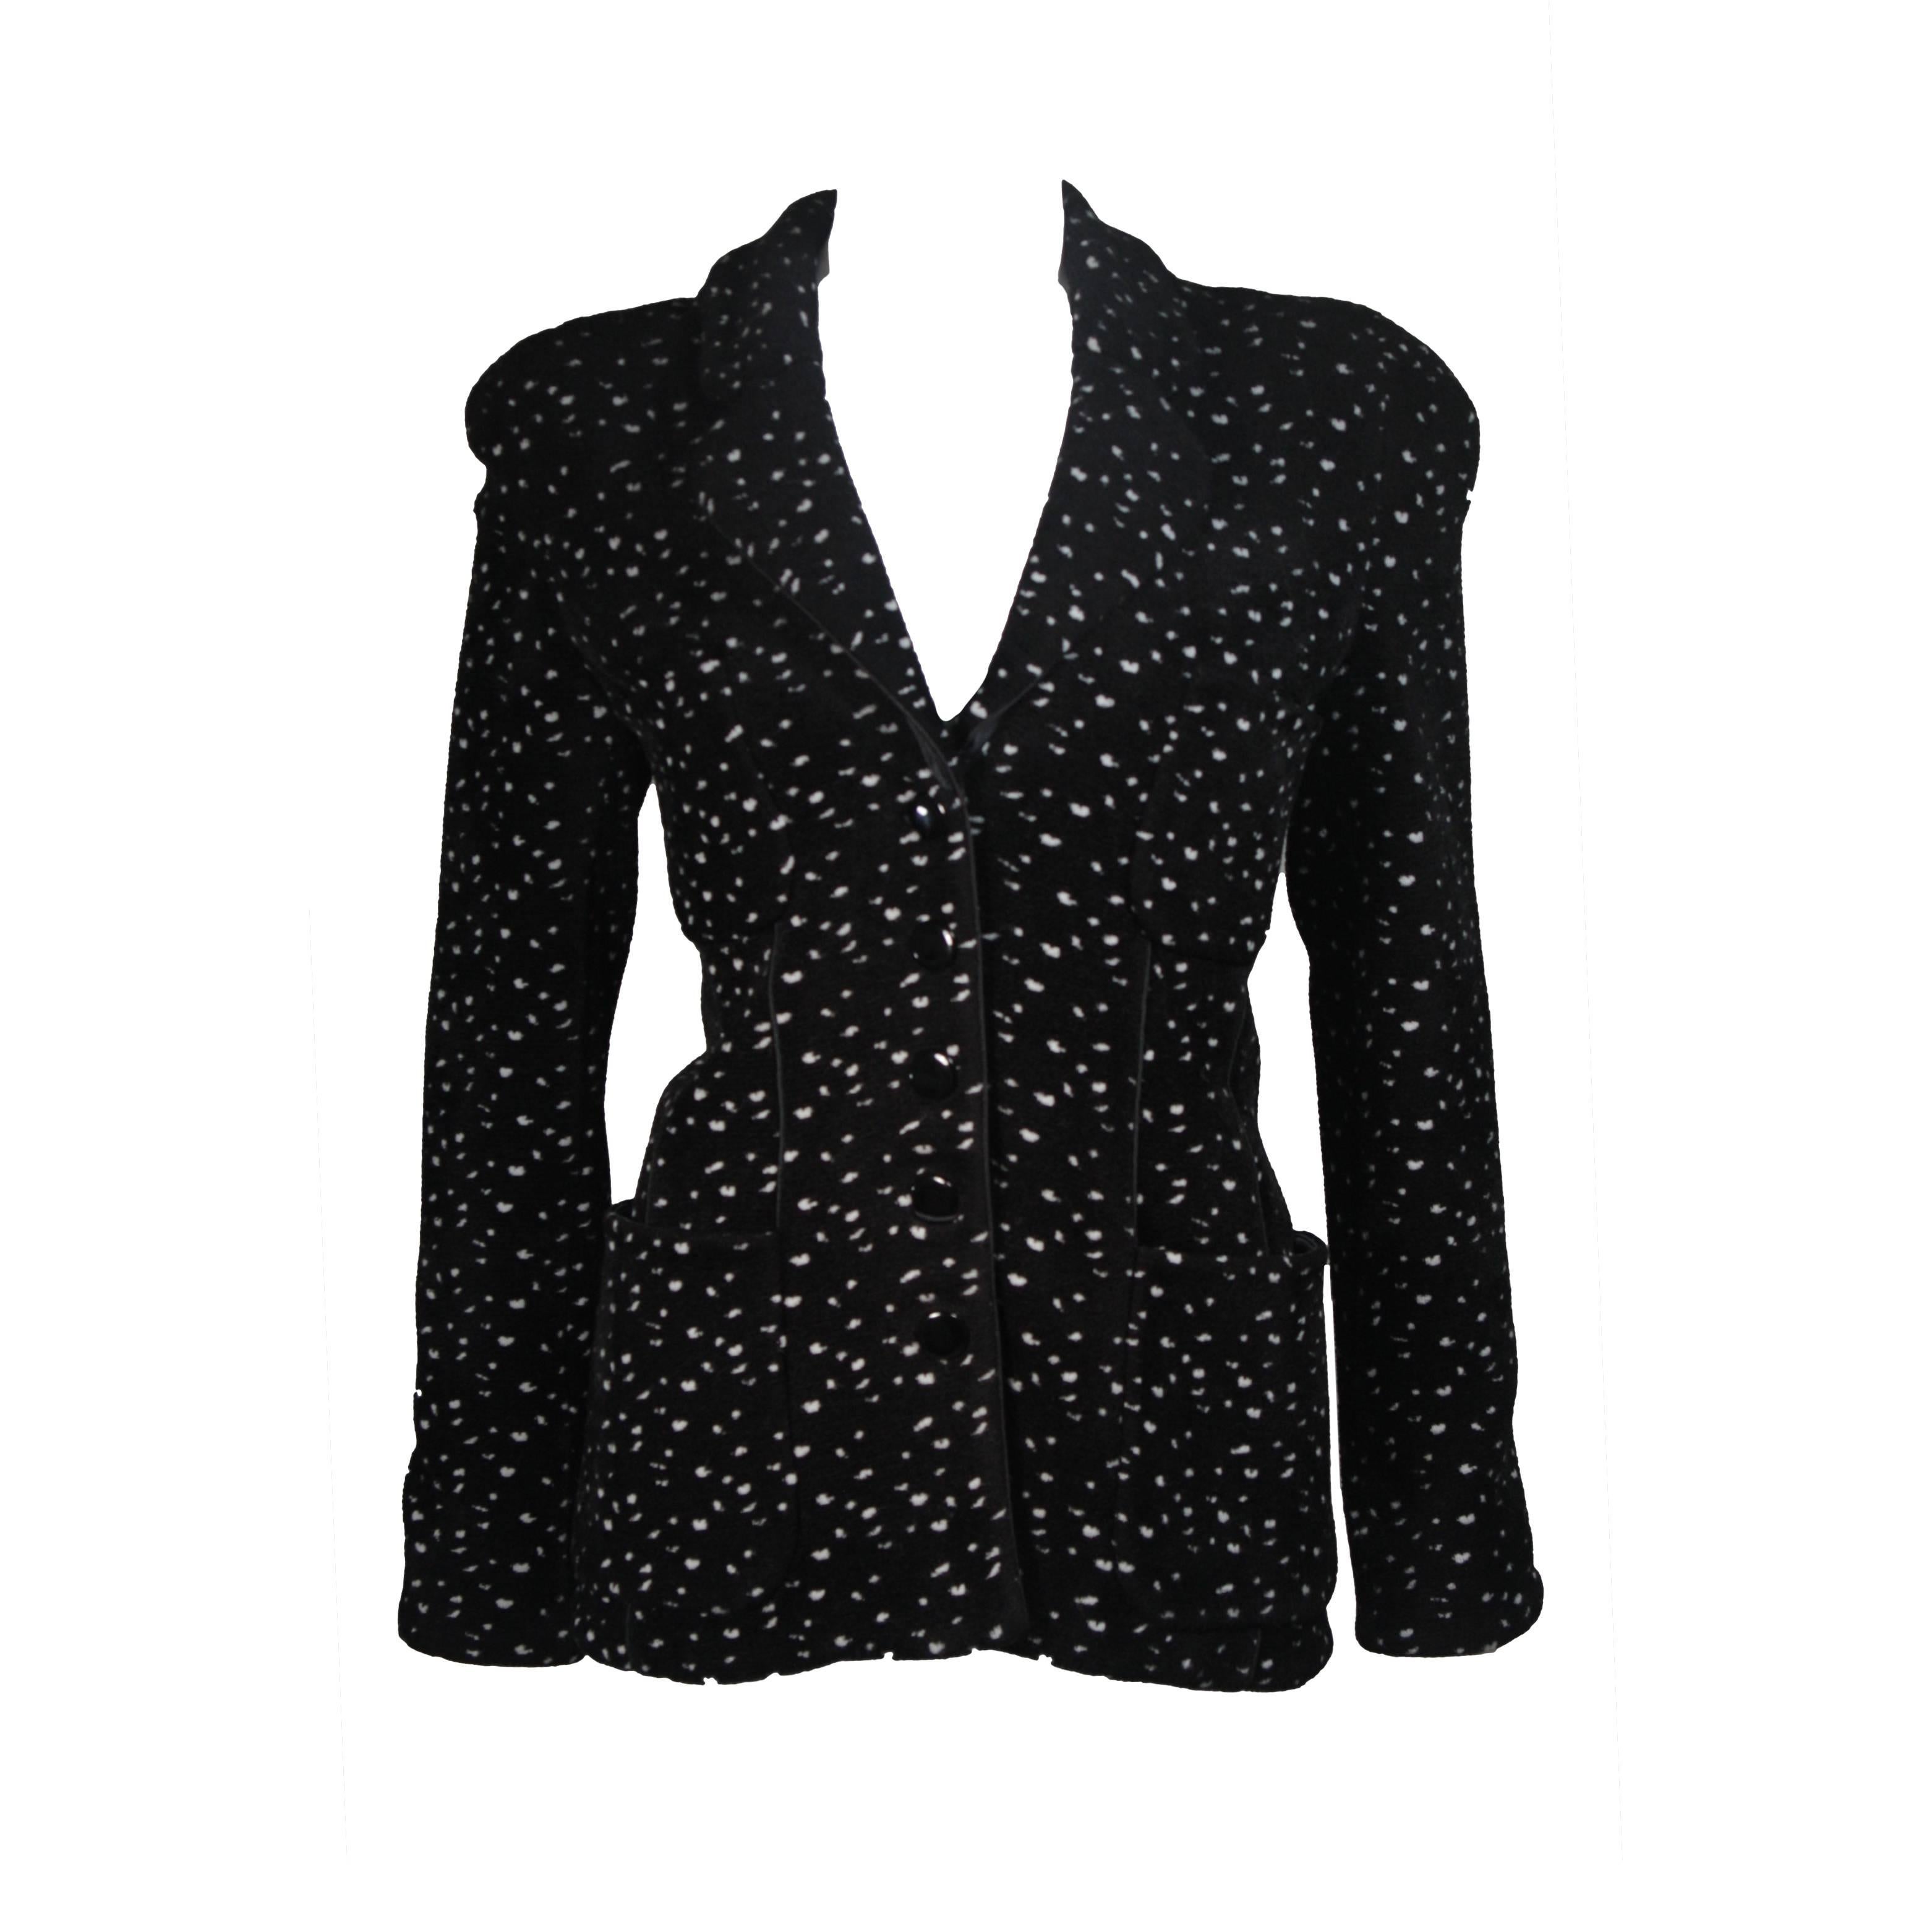 Giorgio Armani Black and White Speckle Wool Blend Jacket with Piping Size 46 For Sale